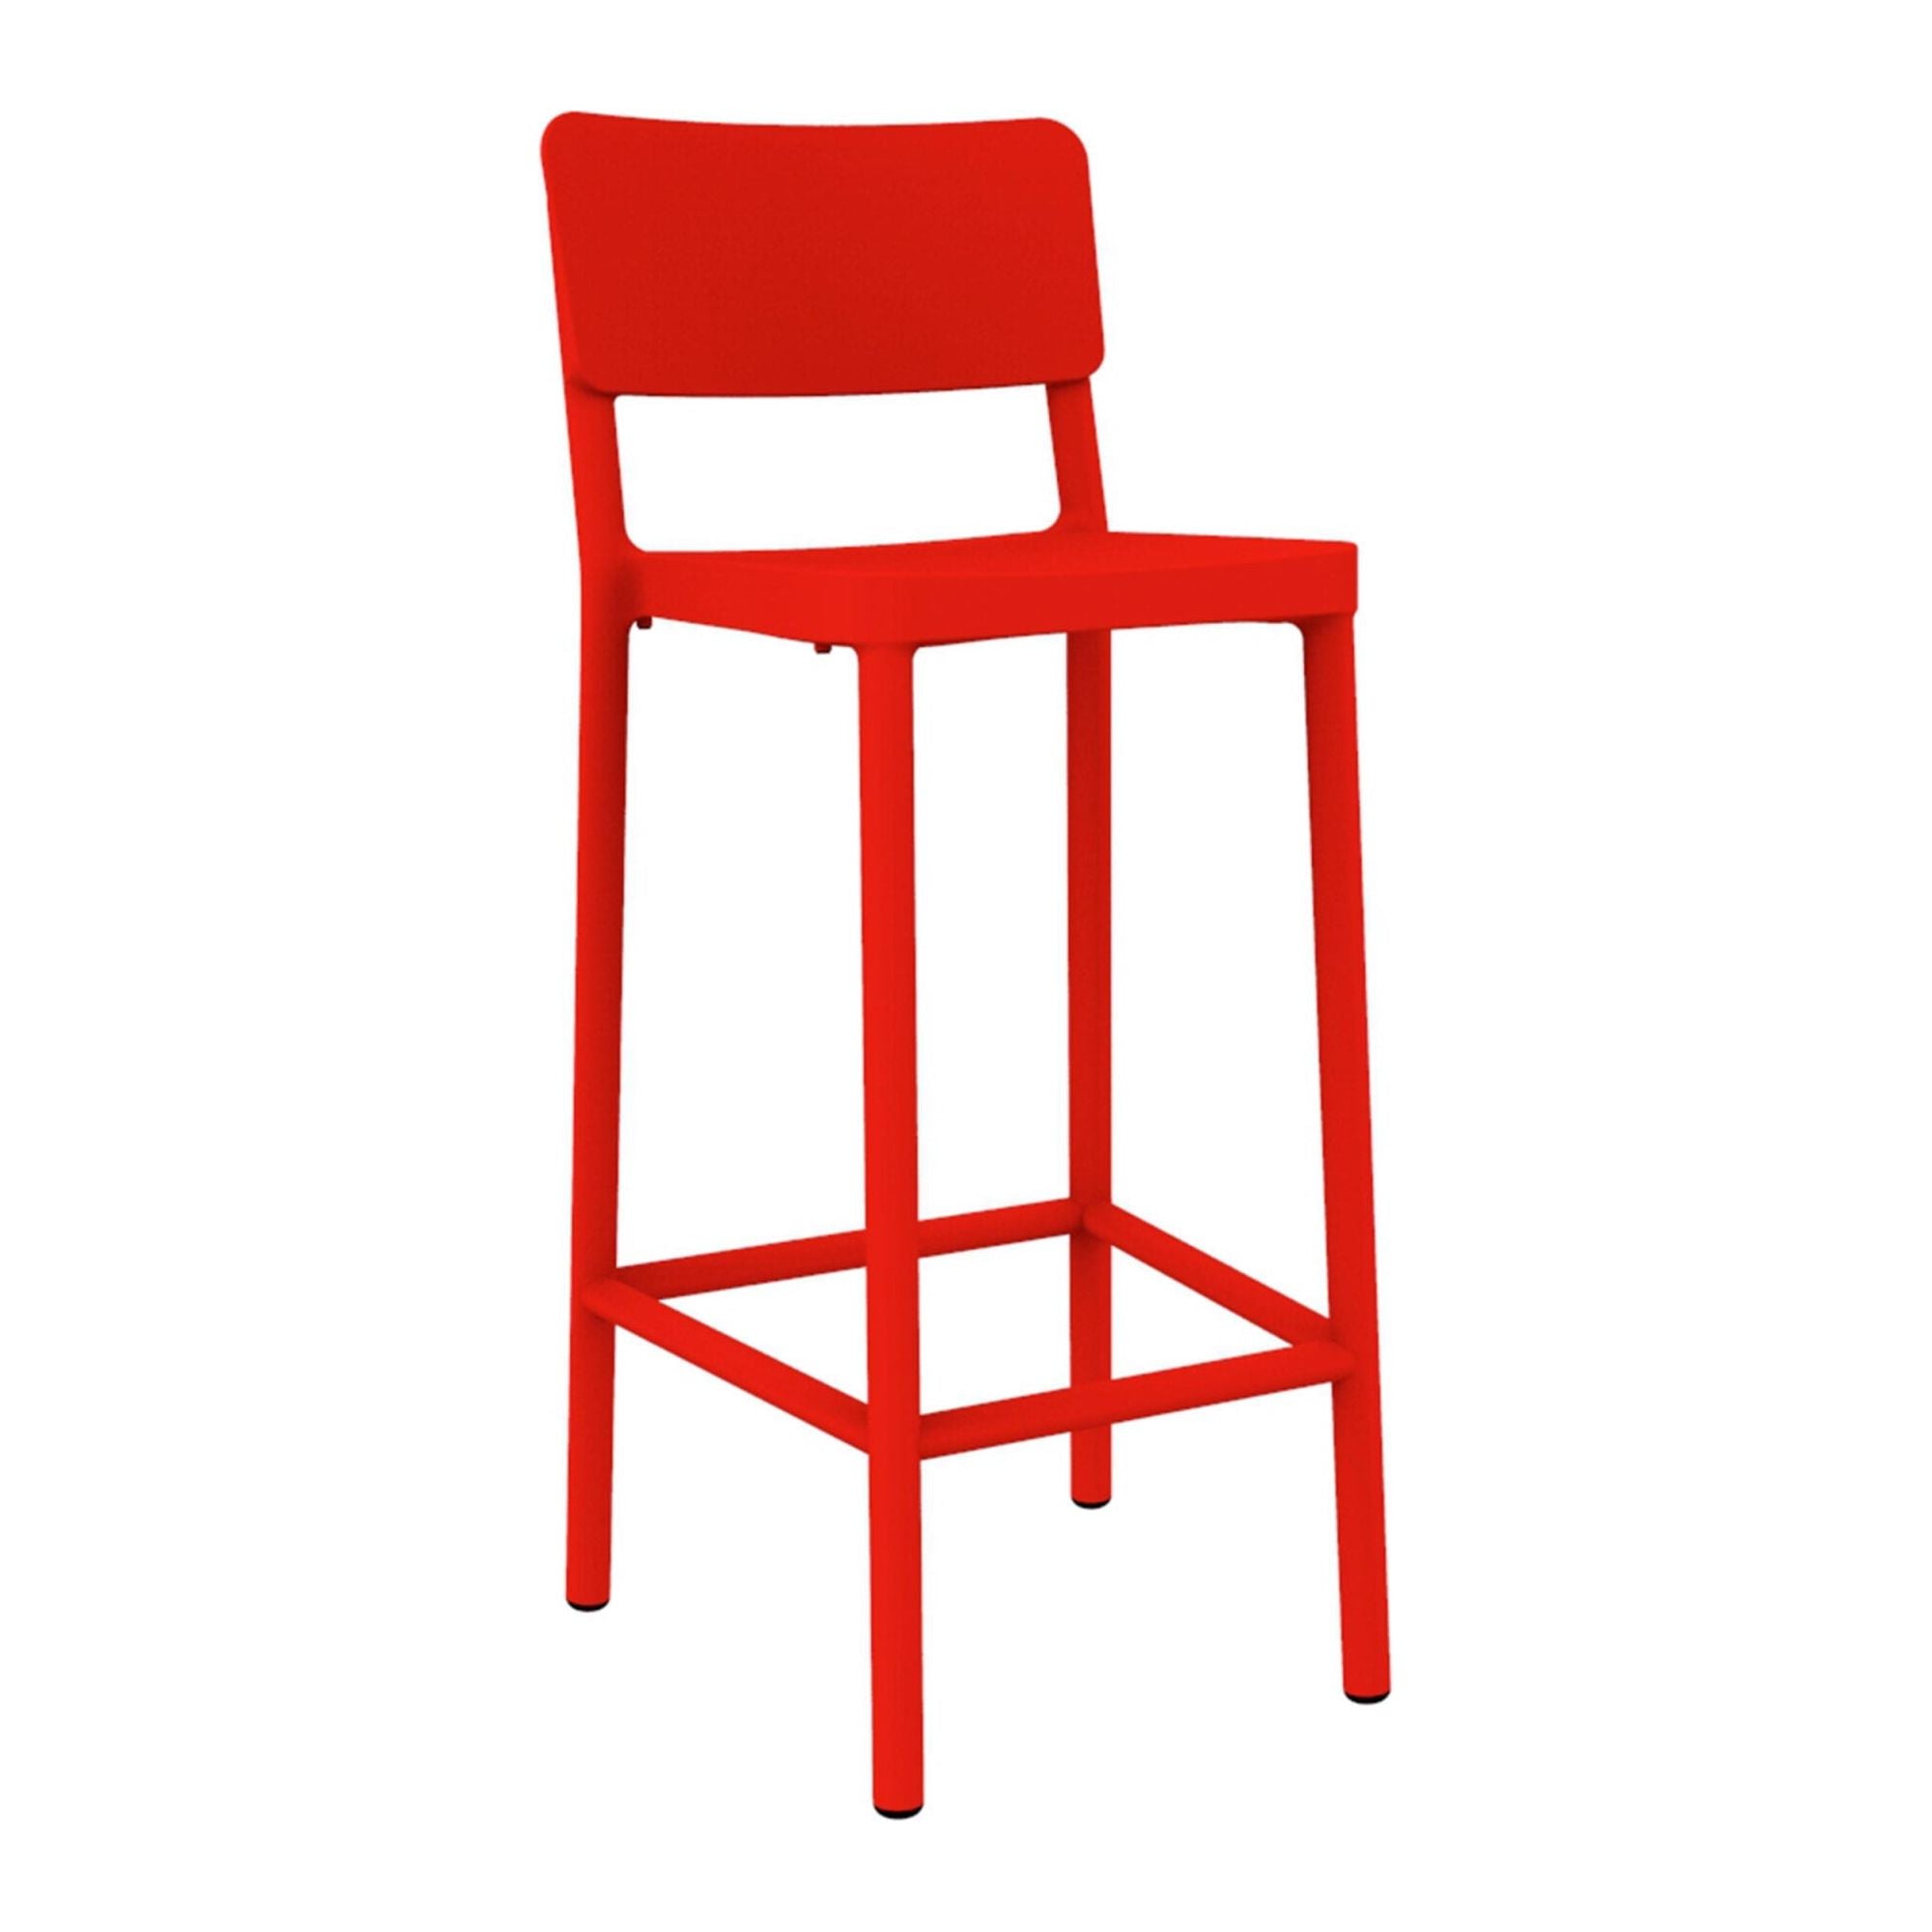 Resol lisboa high chair indoors, outdoors red